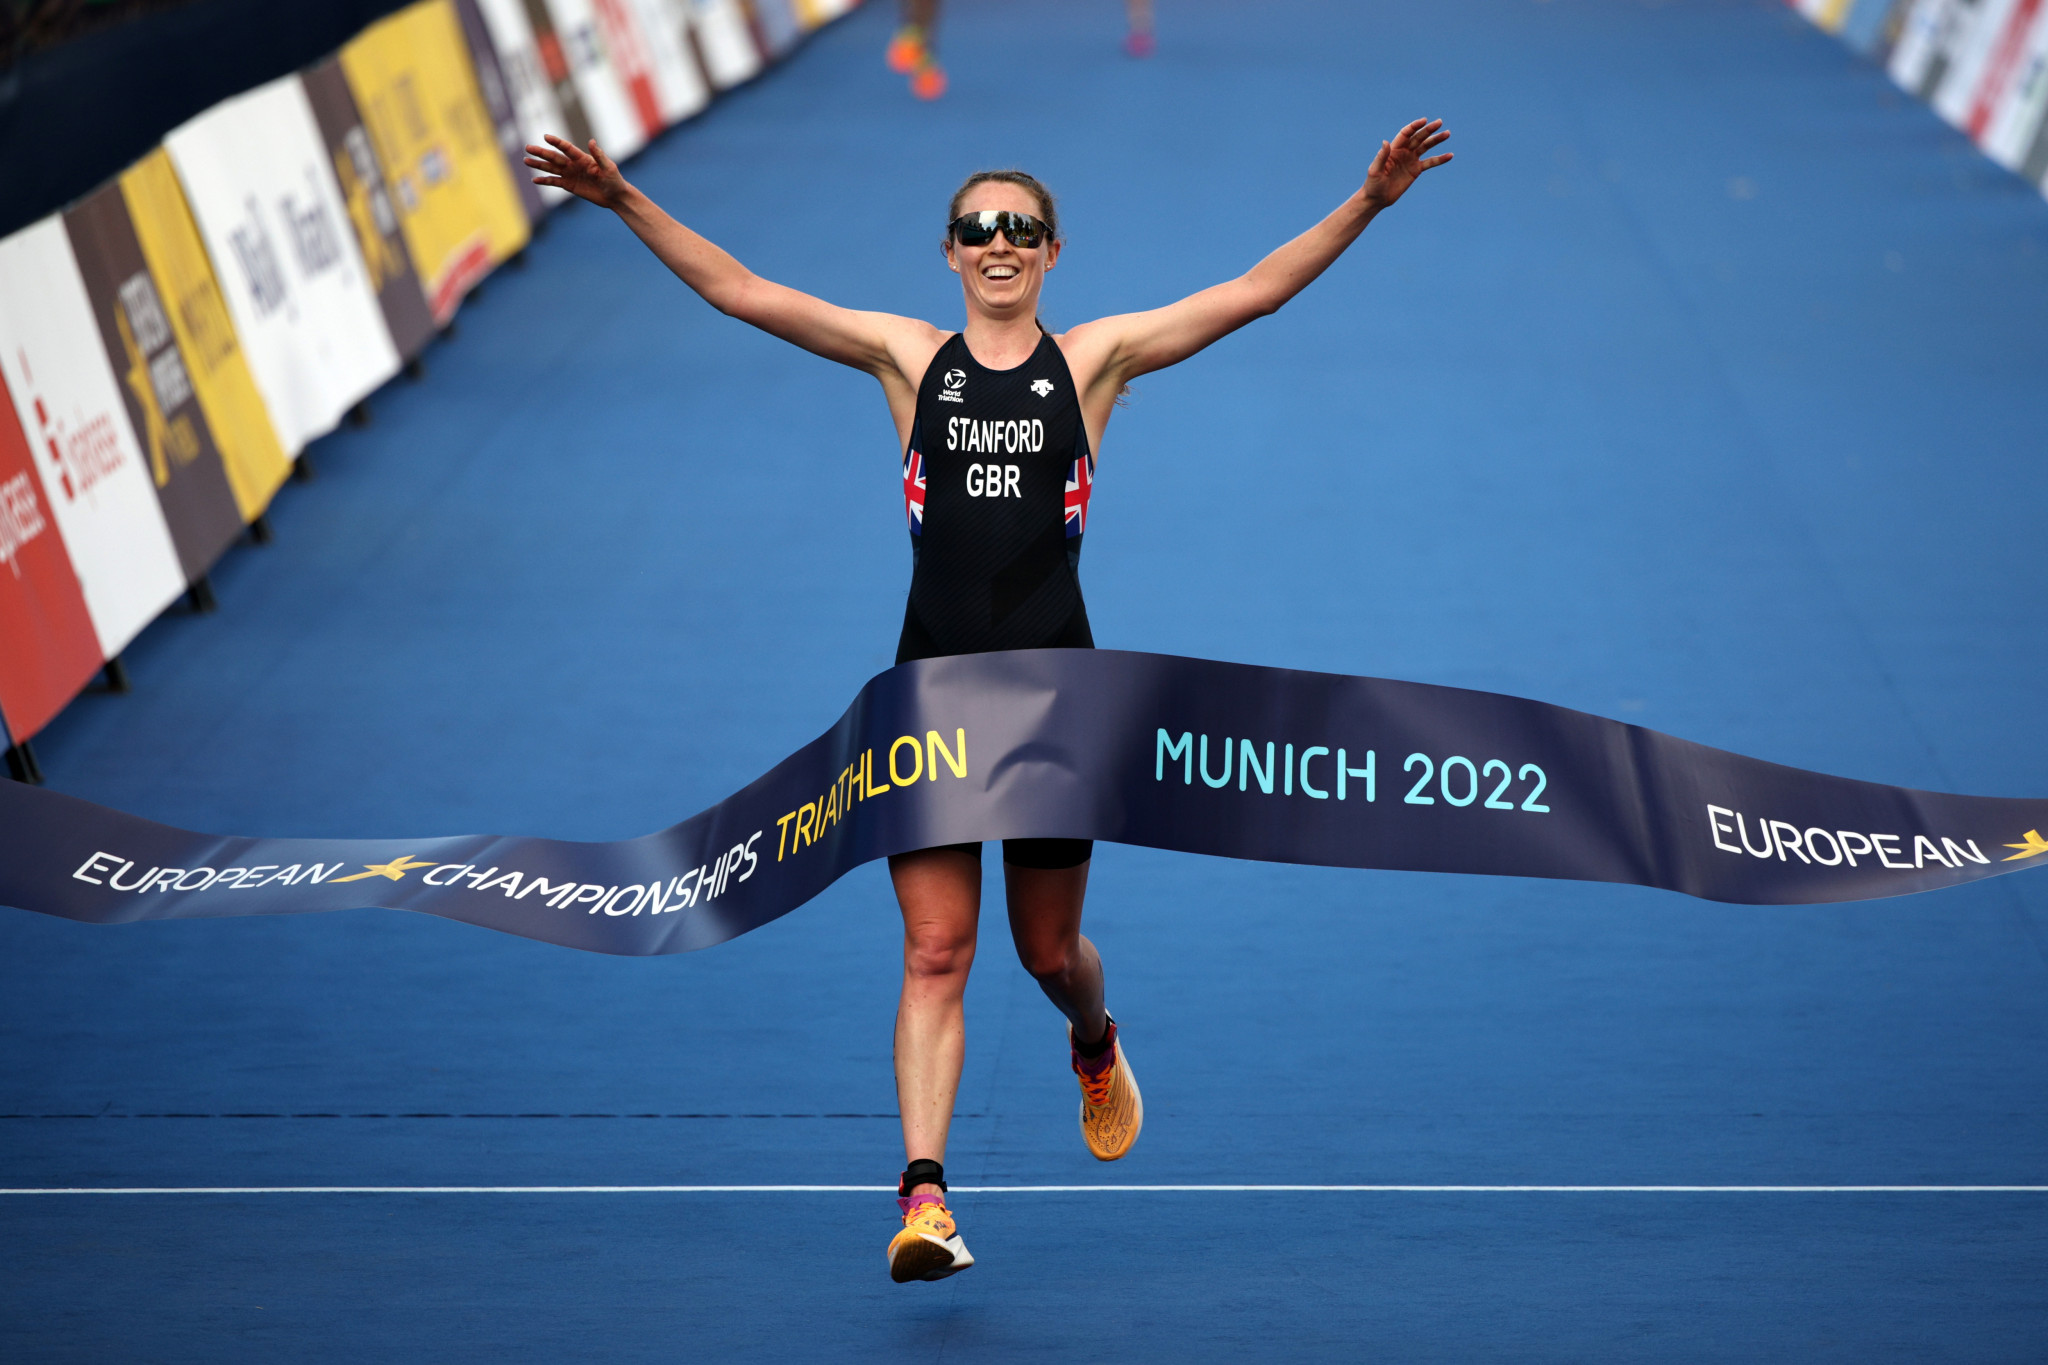 Nine years after winning the women's world triathlon title, Britain's 33-year-old Non Stanford stood on top of the podium again at the Munich 2022 ©Getty Images